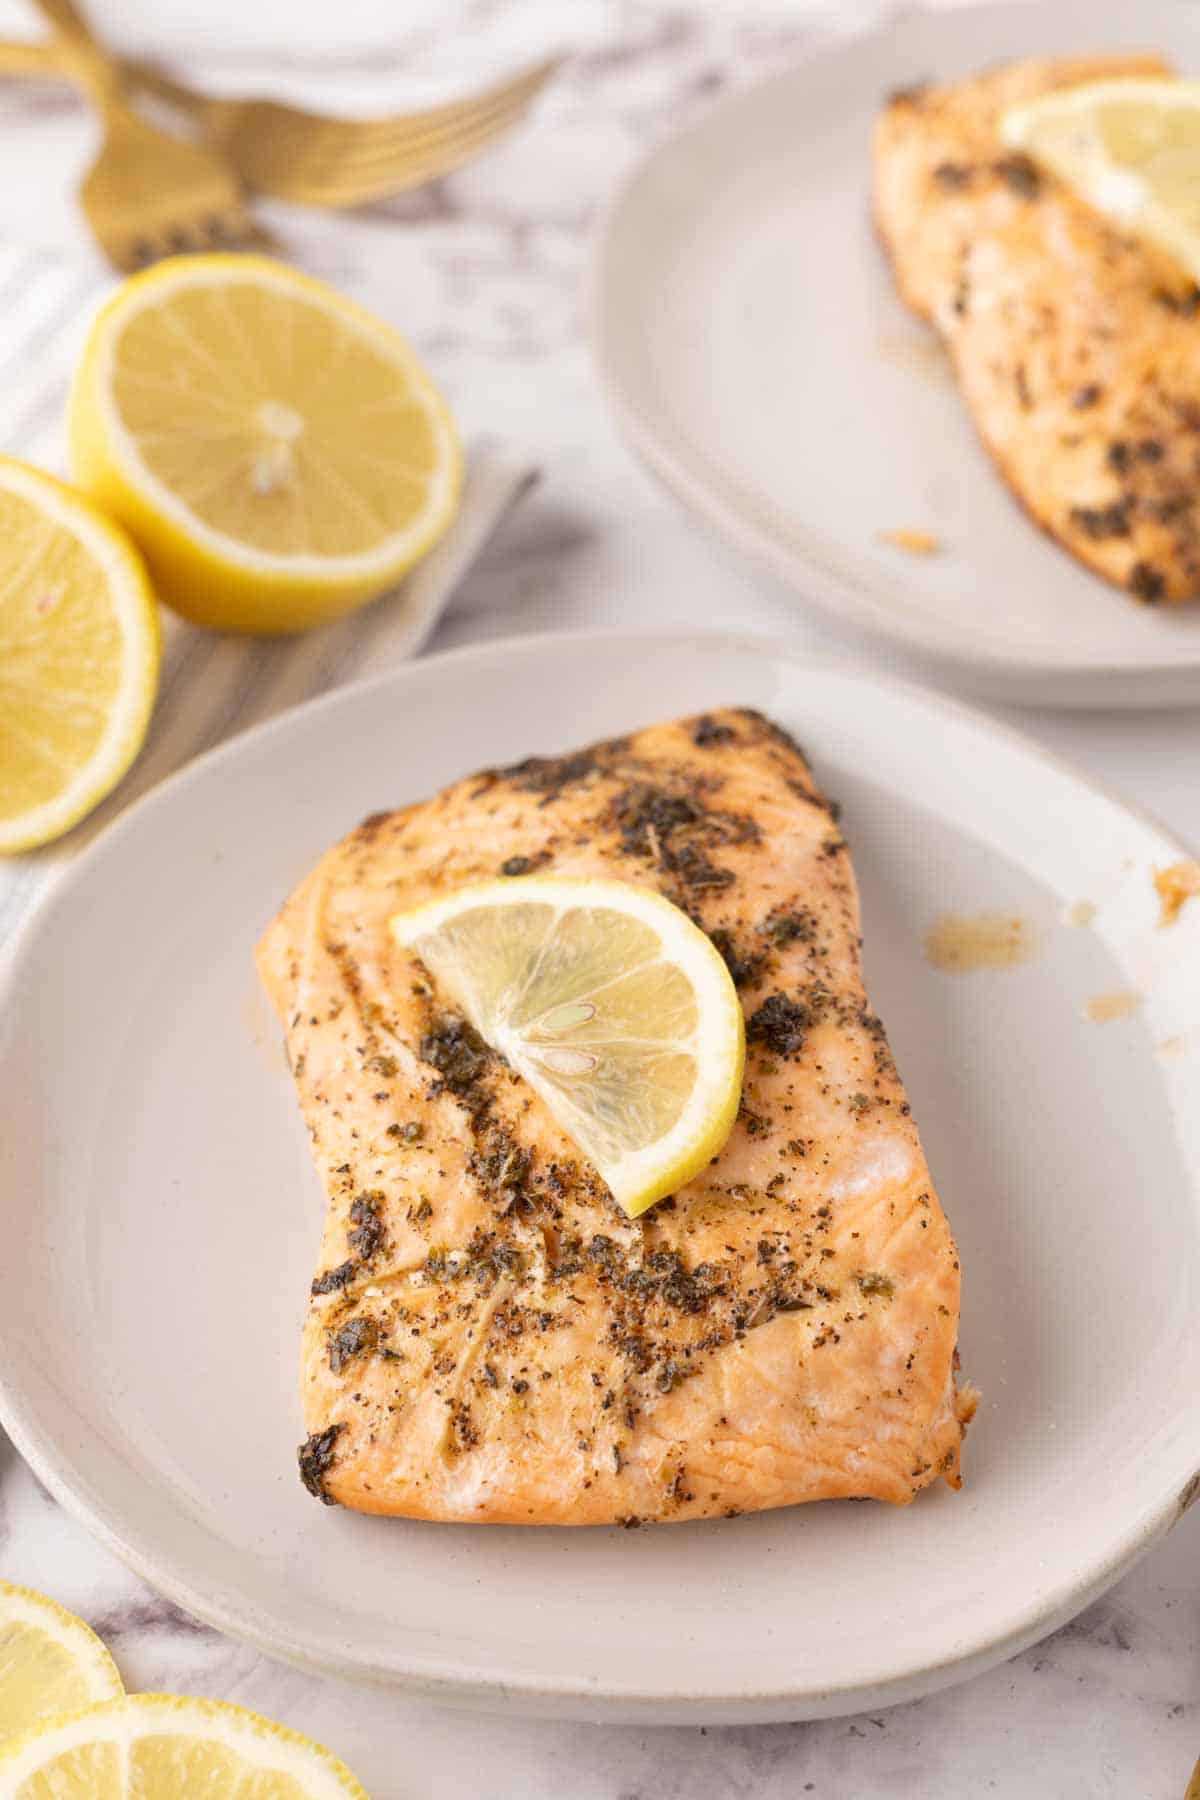 baked salmon filet dinner on a round white plate with a thing lemon slice